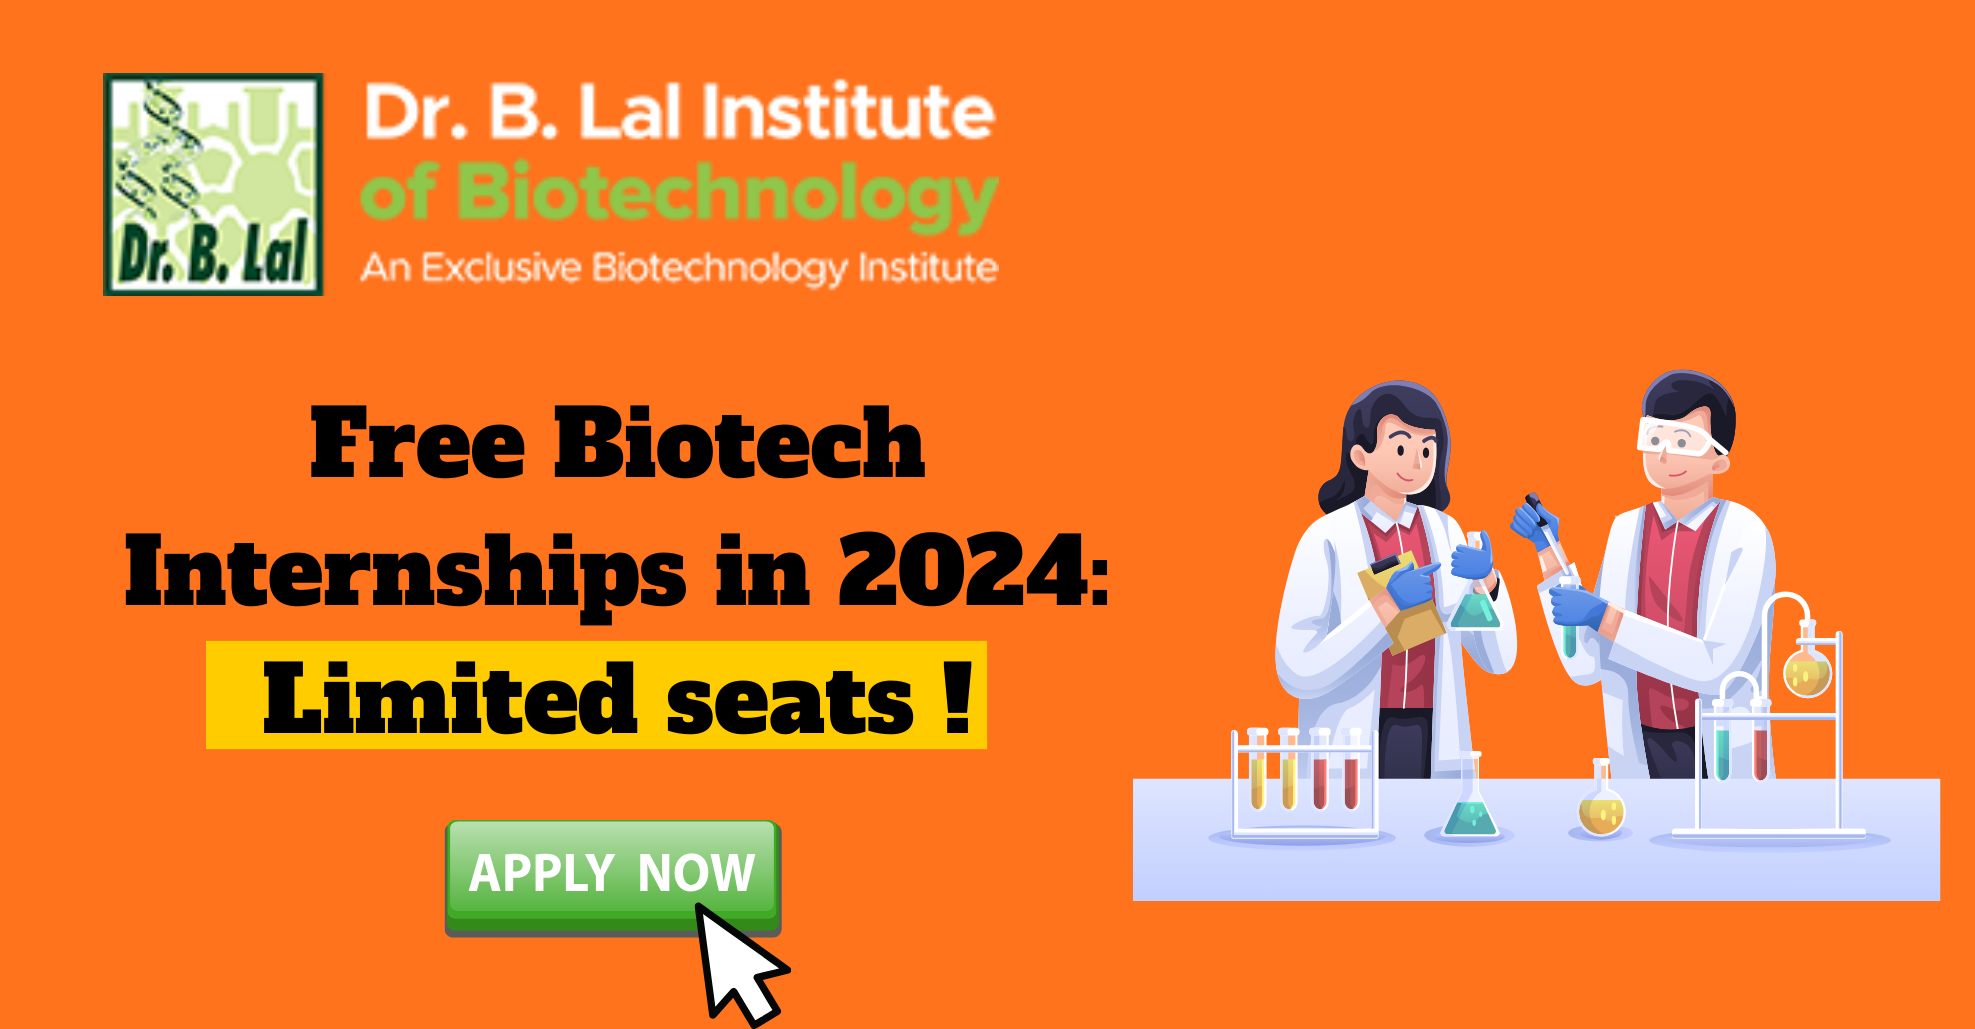 Free Biotech Internships in 2024 Limited seats Apply Now!